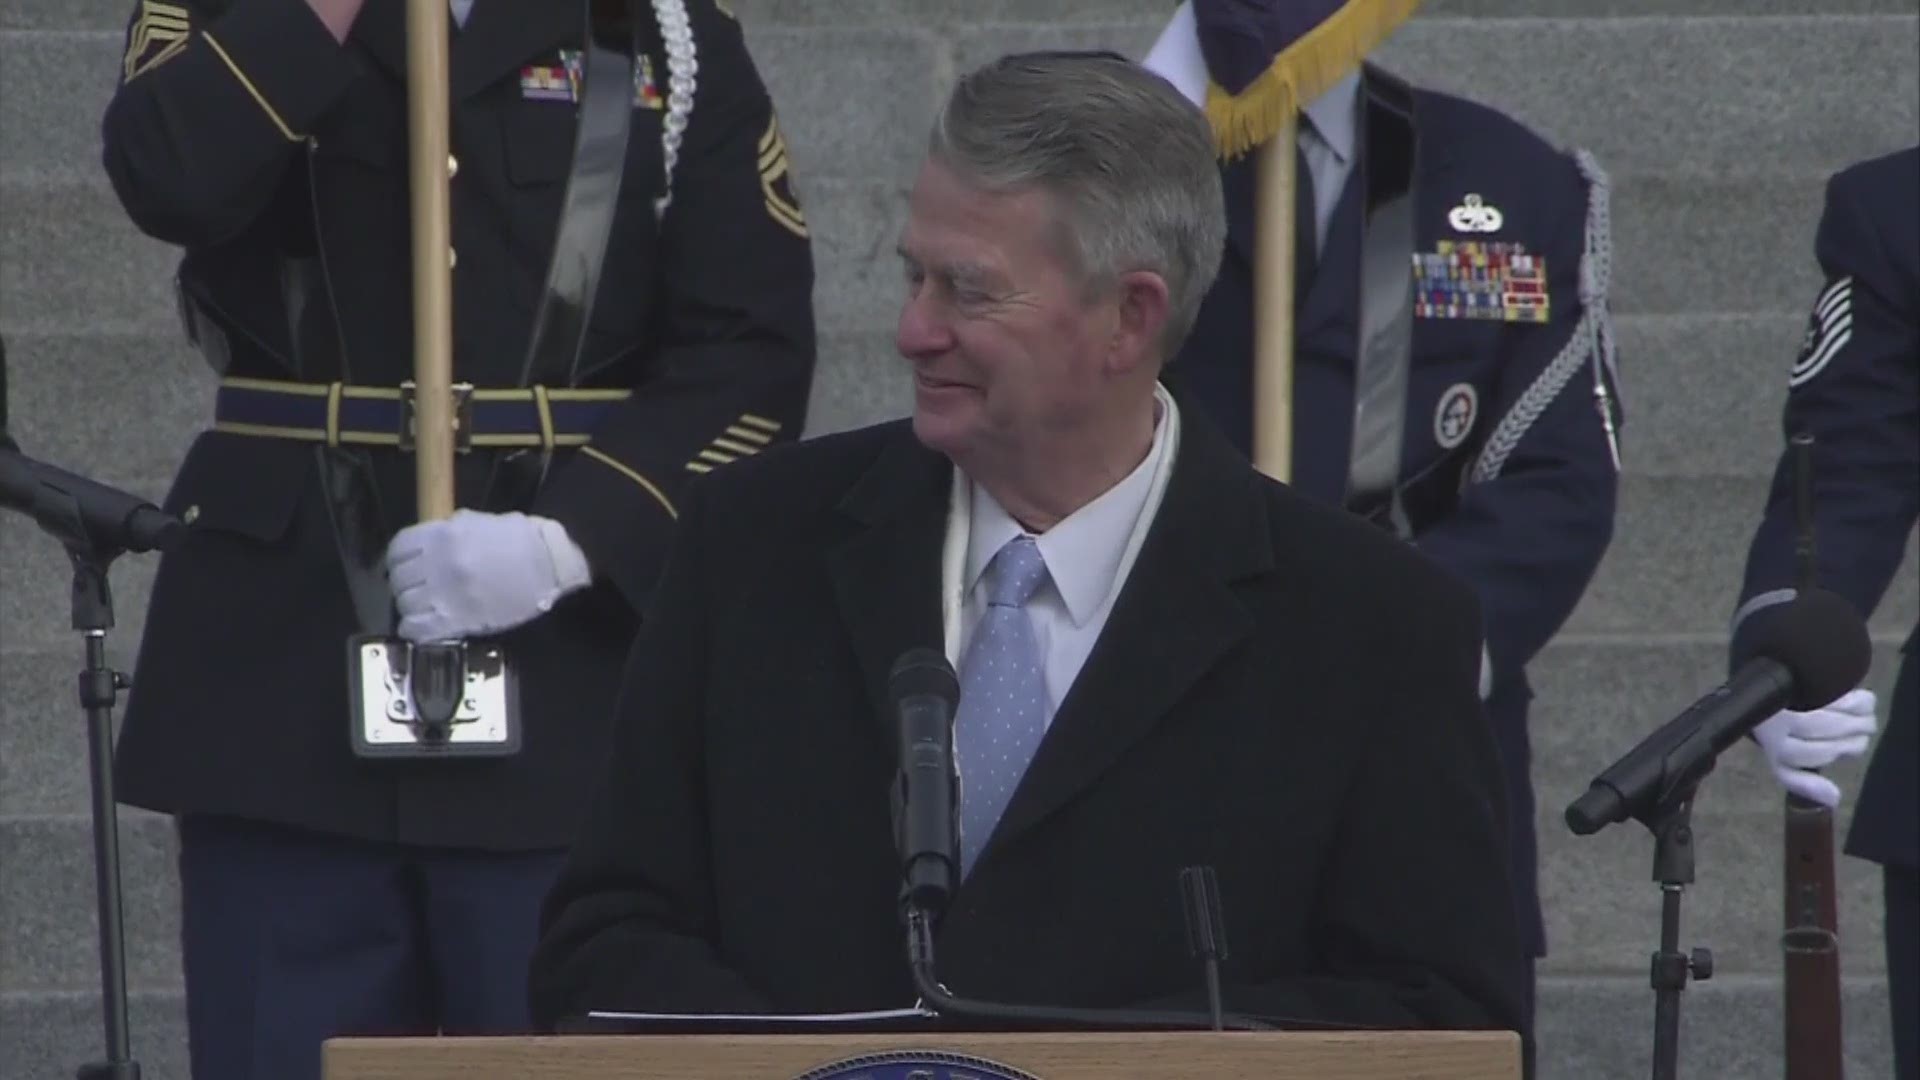 Brad Little was sworn in Friday as Idaho's 33rd governor. Here is his speech to Idahoans during the inauguration ceremony.